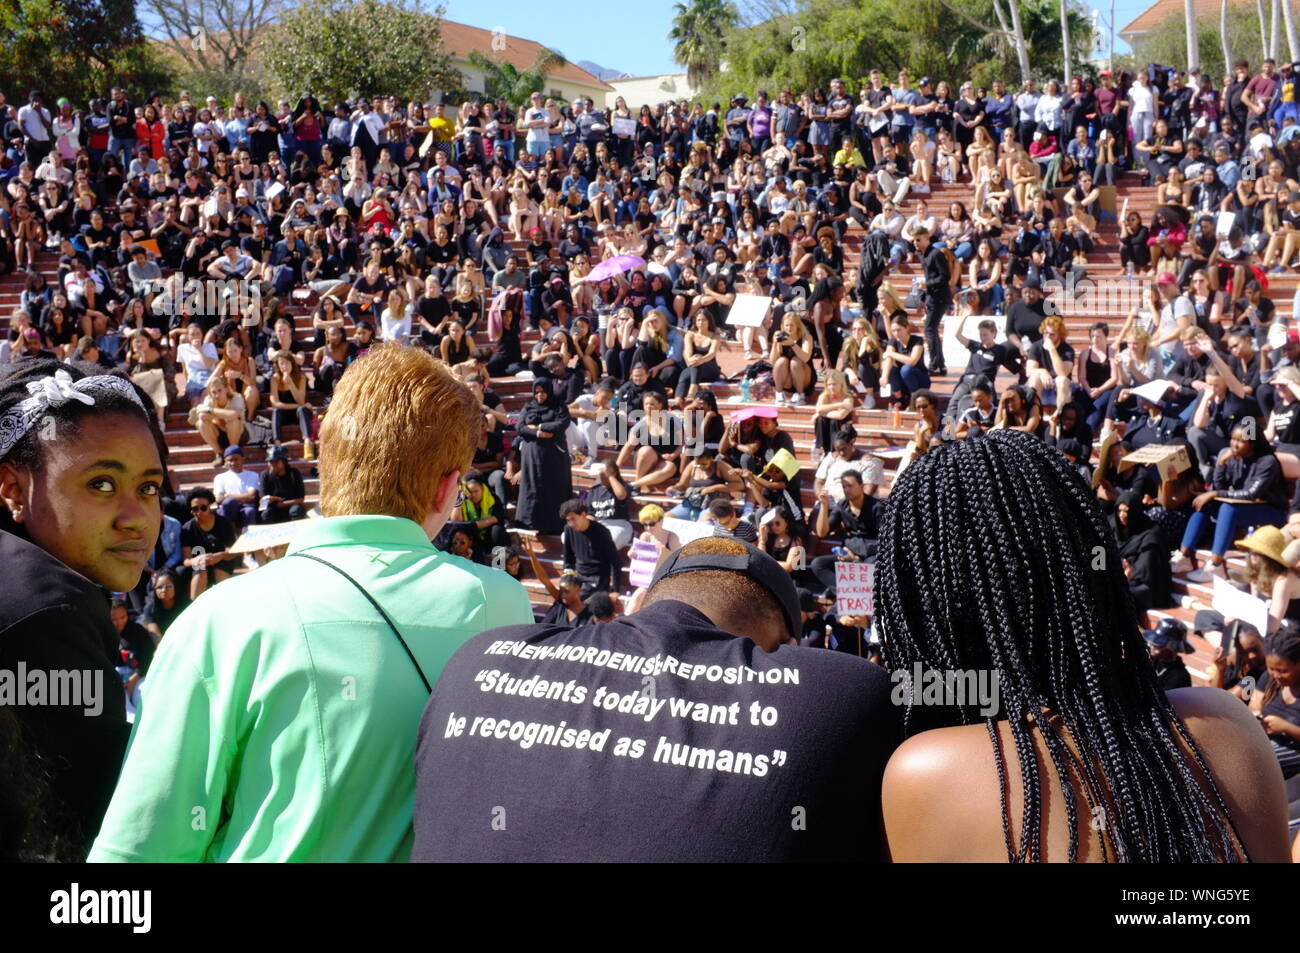 Students from the University of Stellenbosch dressed in black gather to protest against the recent events of gender violence that have rocked South Africa. Several hundred students and staff members held a 2 hour protest at the university demanding action from senior staff members. The protesters come after a series of high profile murders and rapes have shaken South Africa and resulted in calls for action and a national shut down. Stock Photo